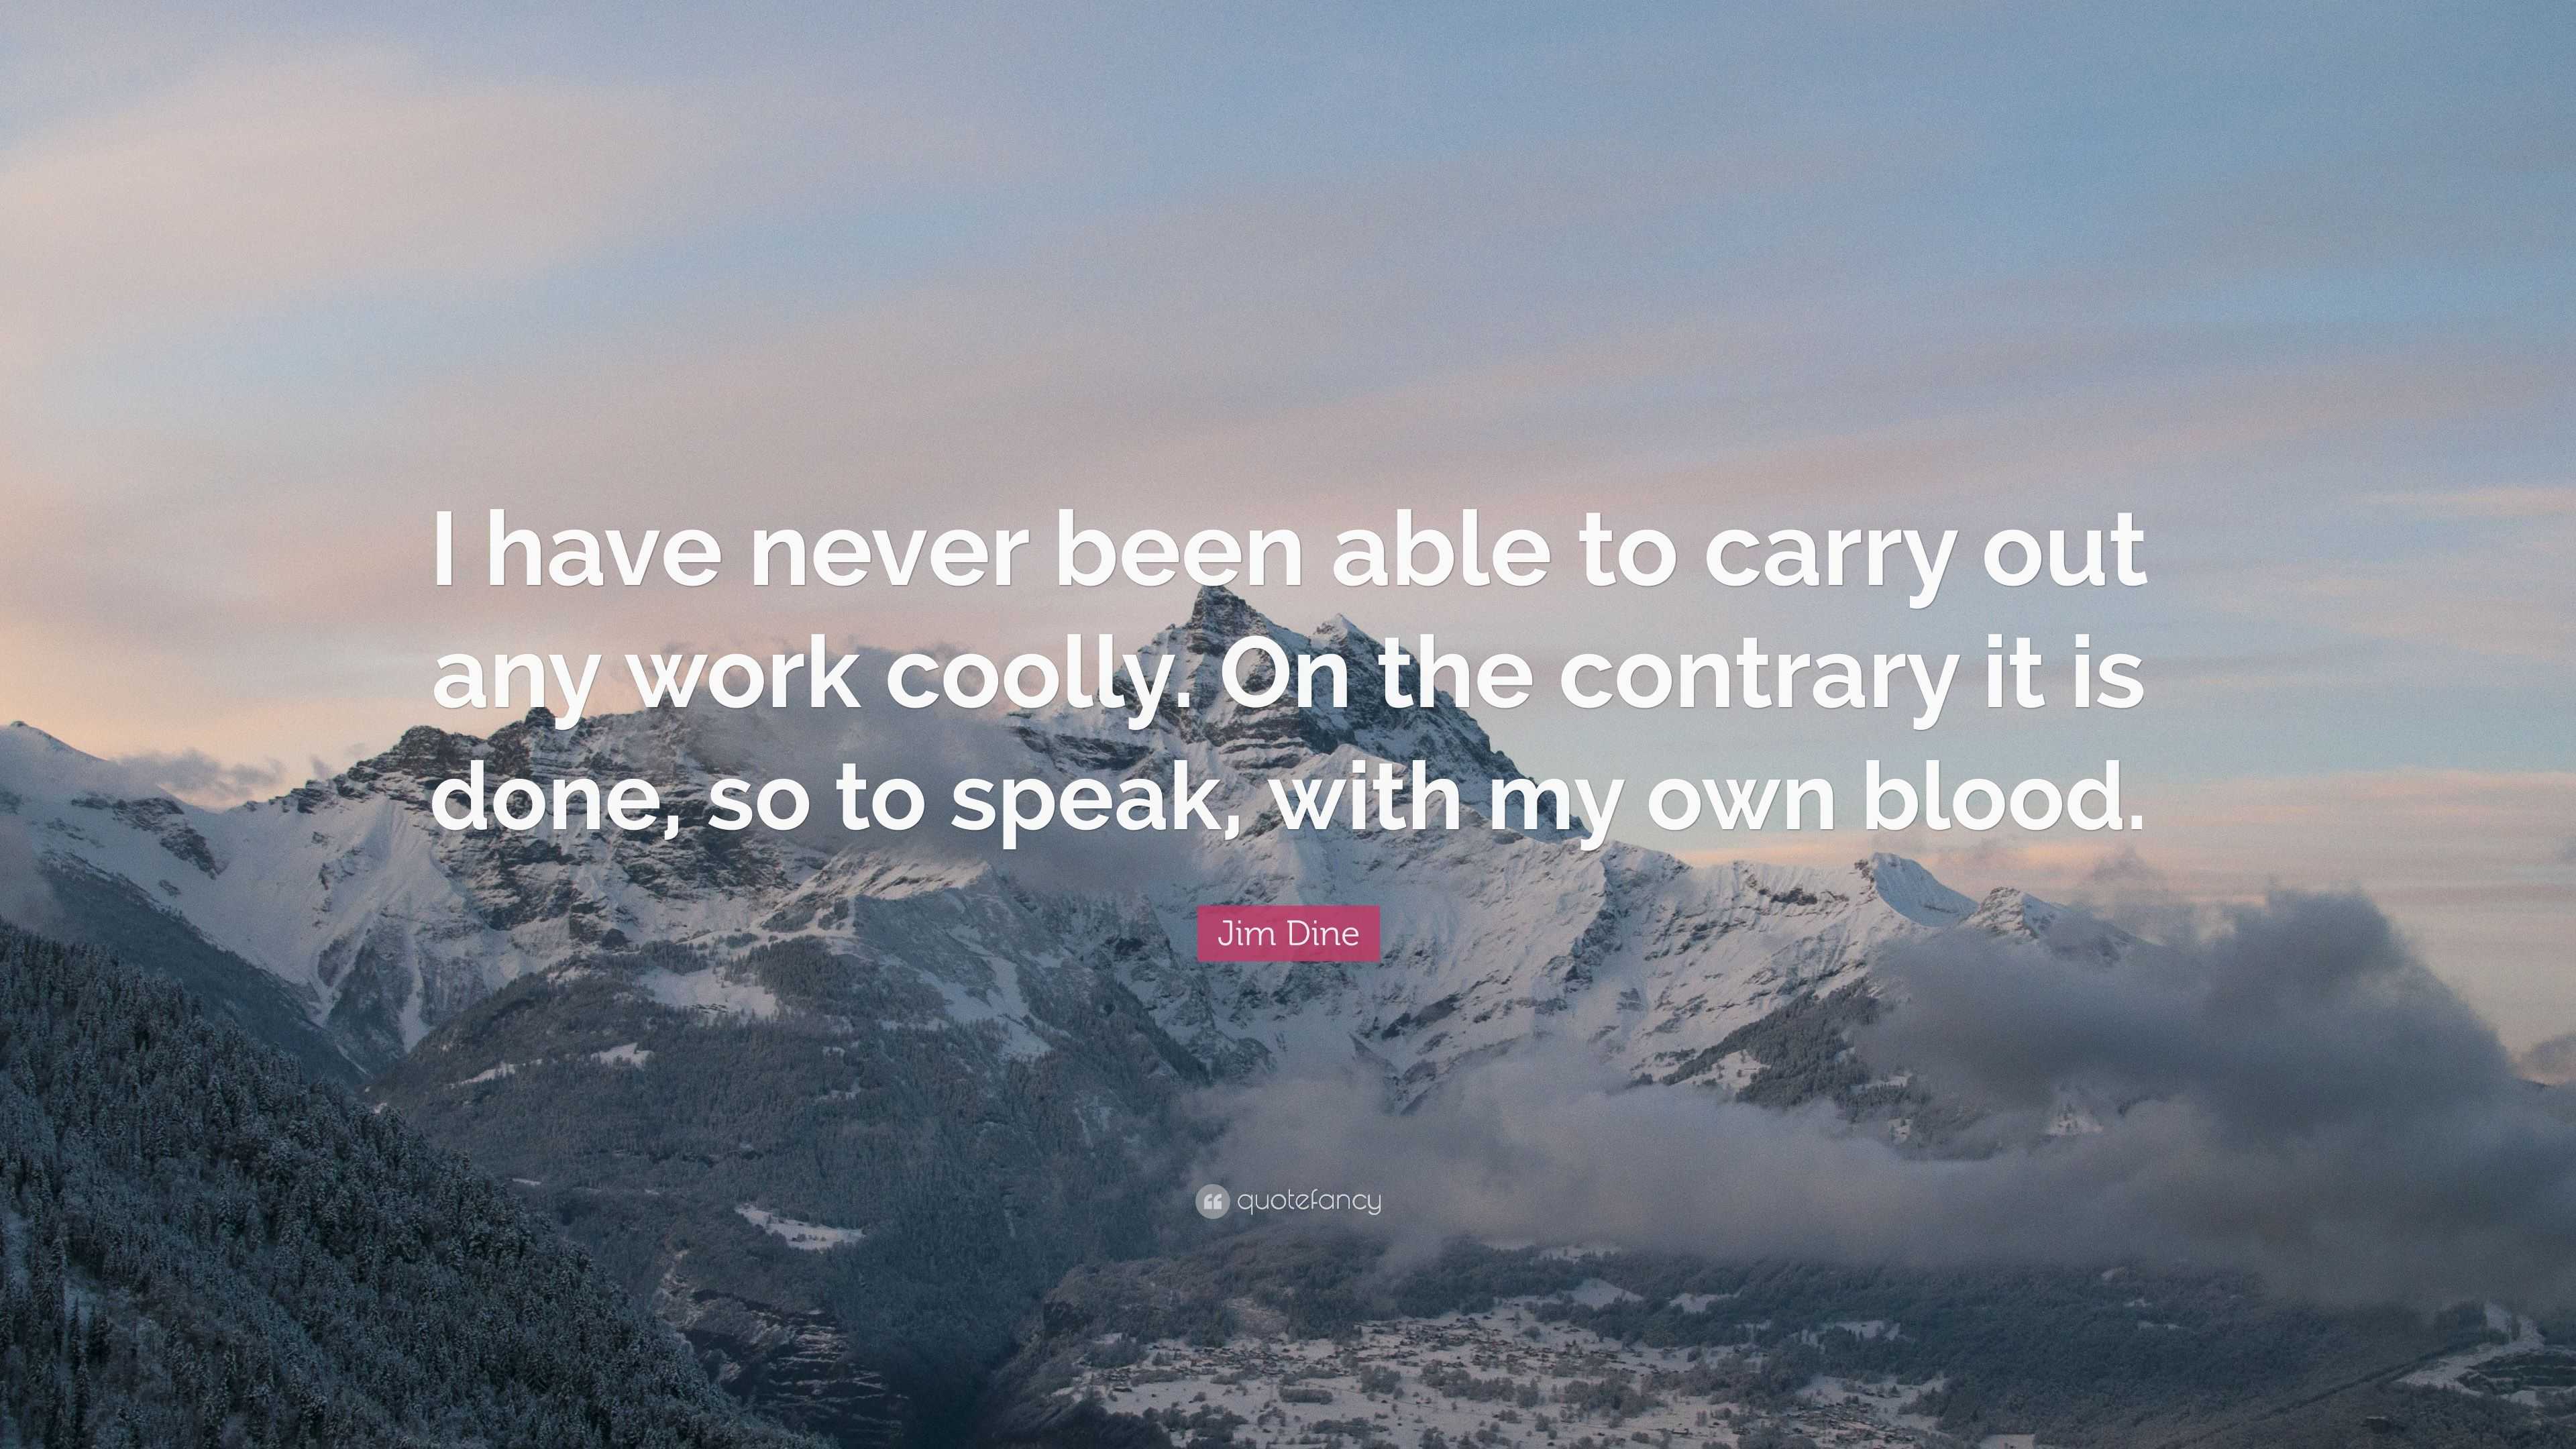 Jim Dine Quote: “I have never been able to carry out any work coolly ...